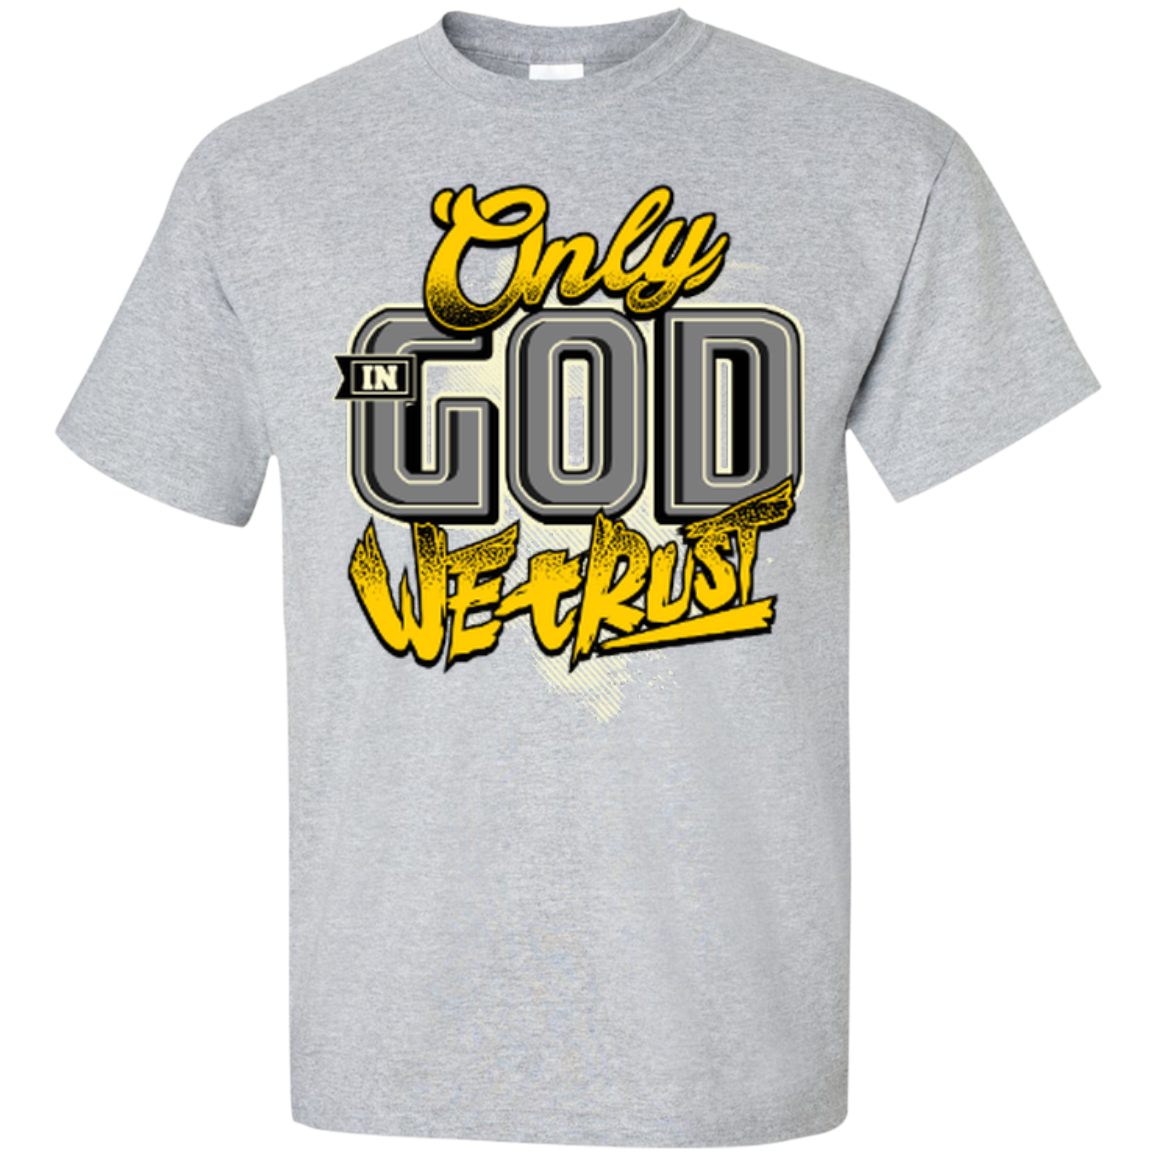 Only In God We Trust - Apostolic Images - Cotton T-Shirt - Kick Merch - 1